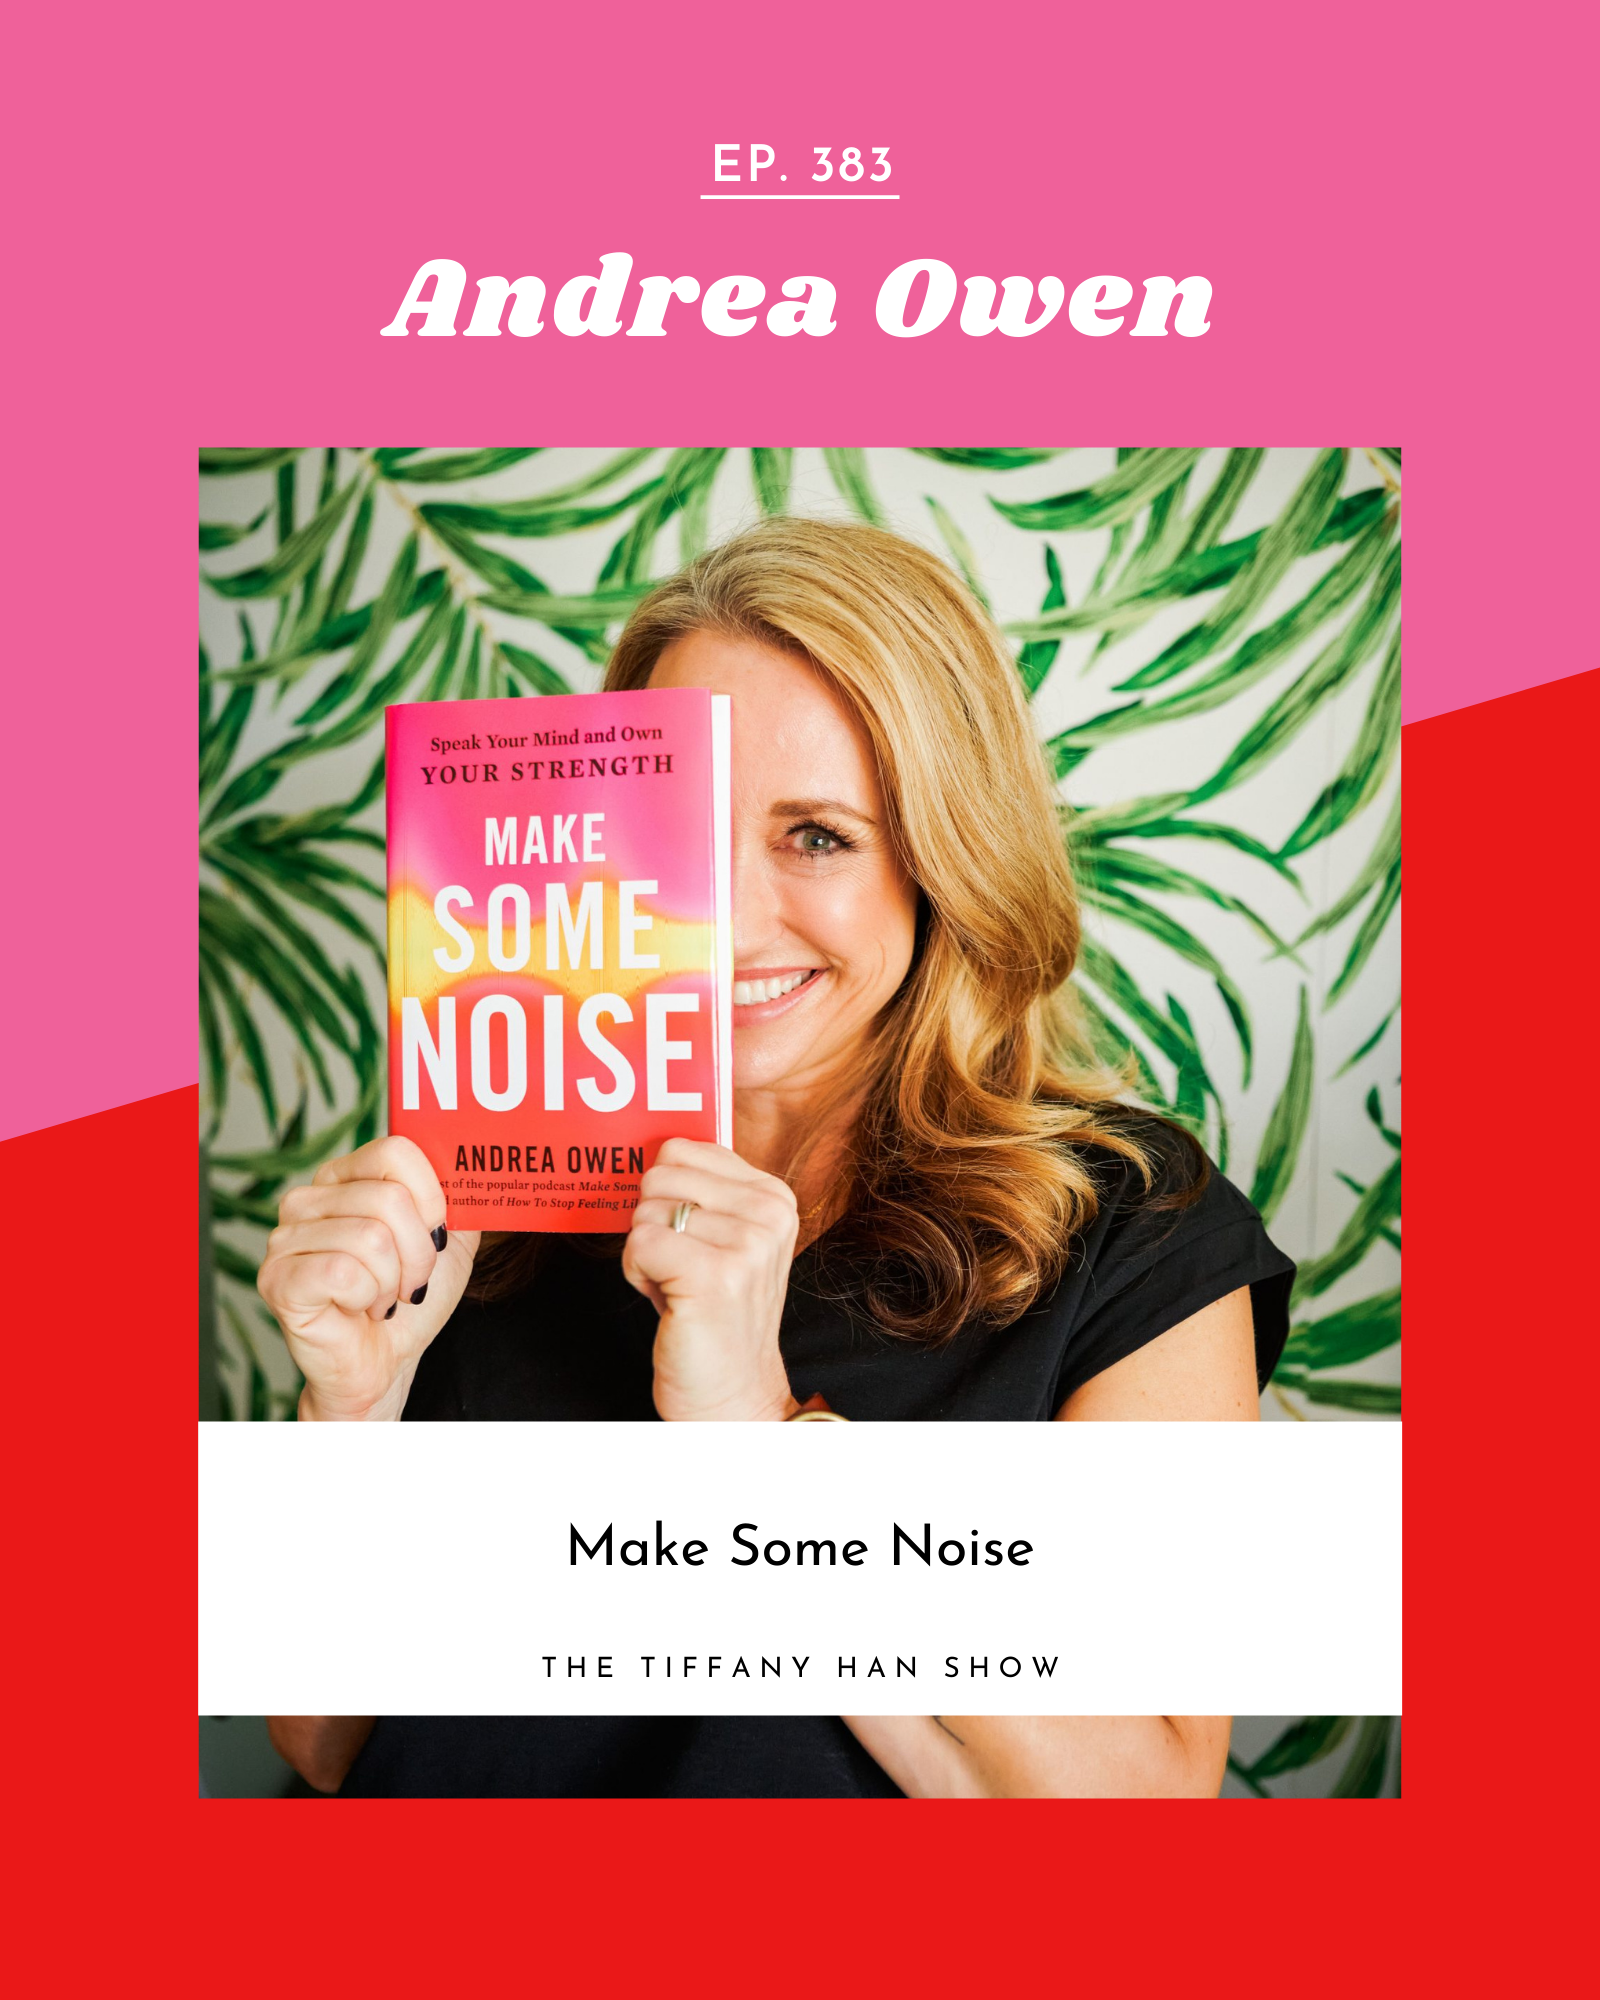 Make Some Noise with Andrea Owen